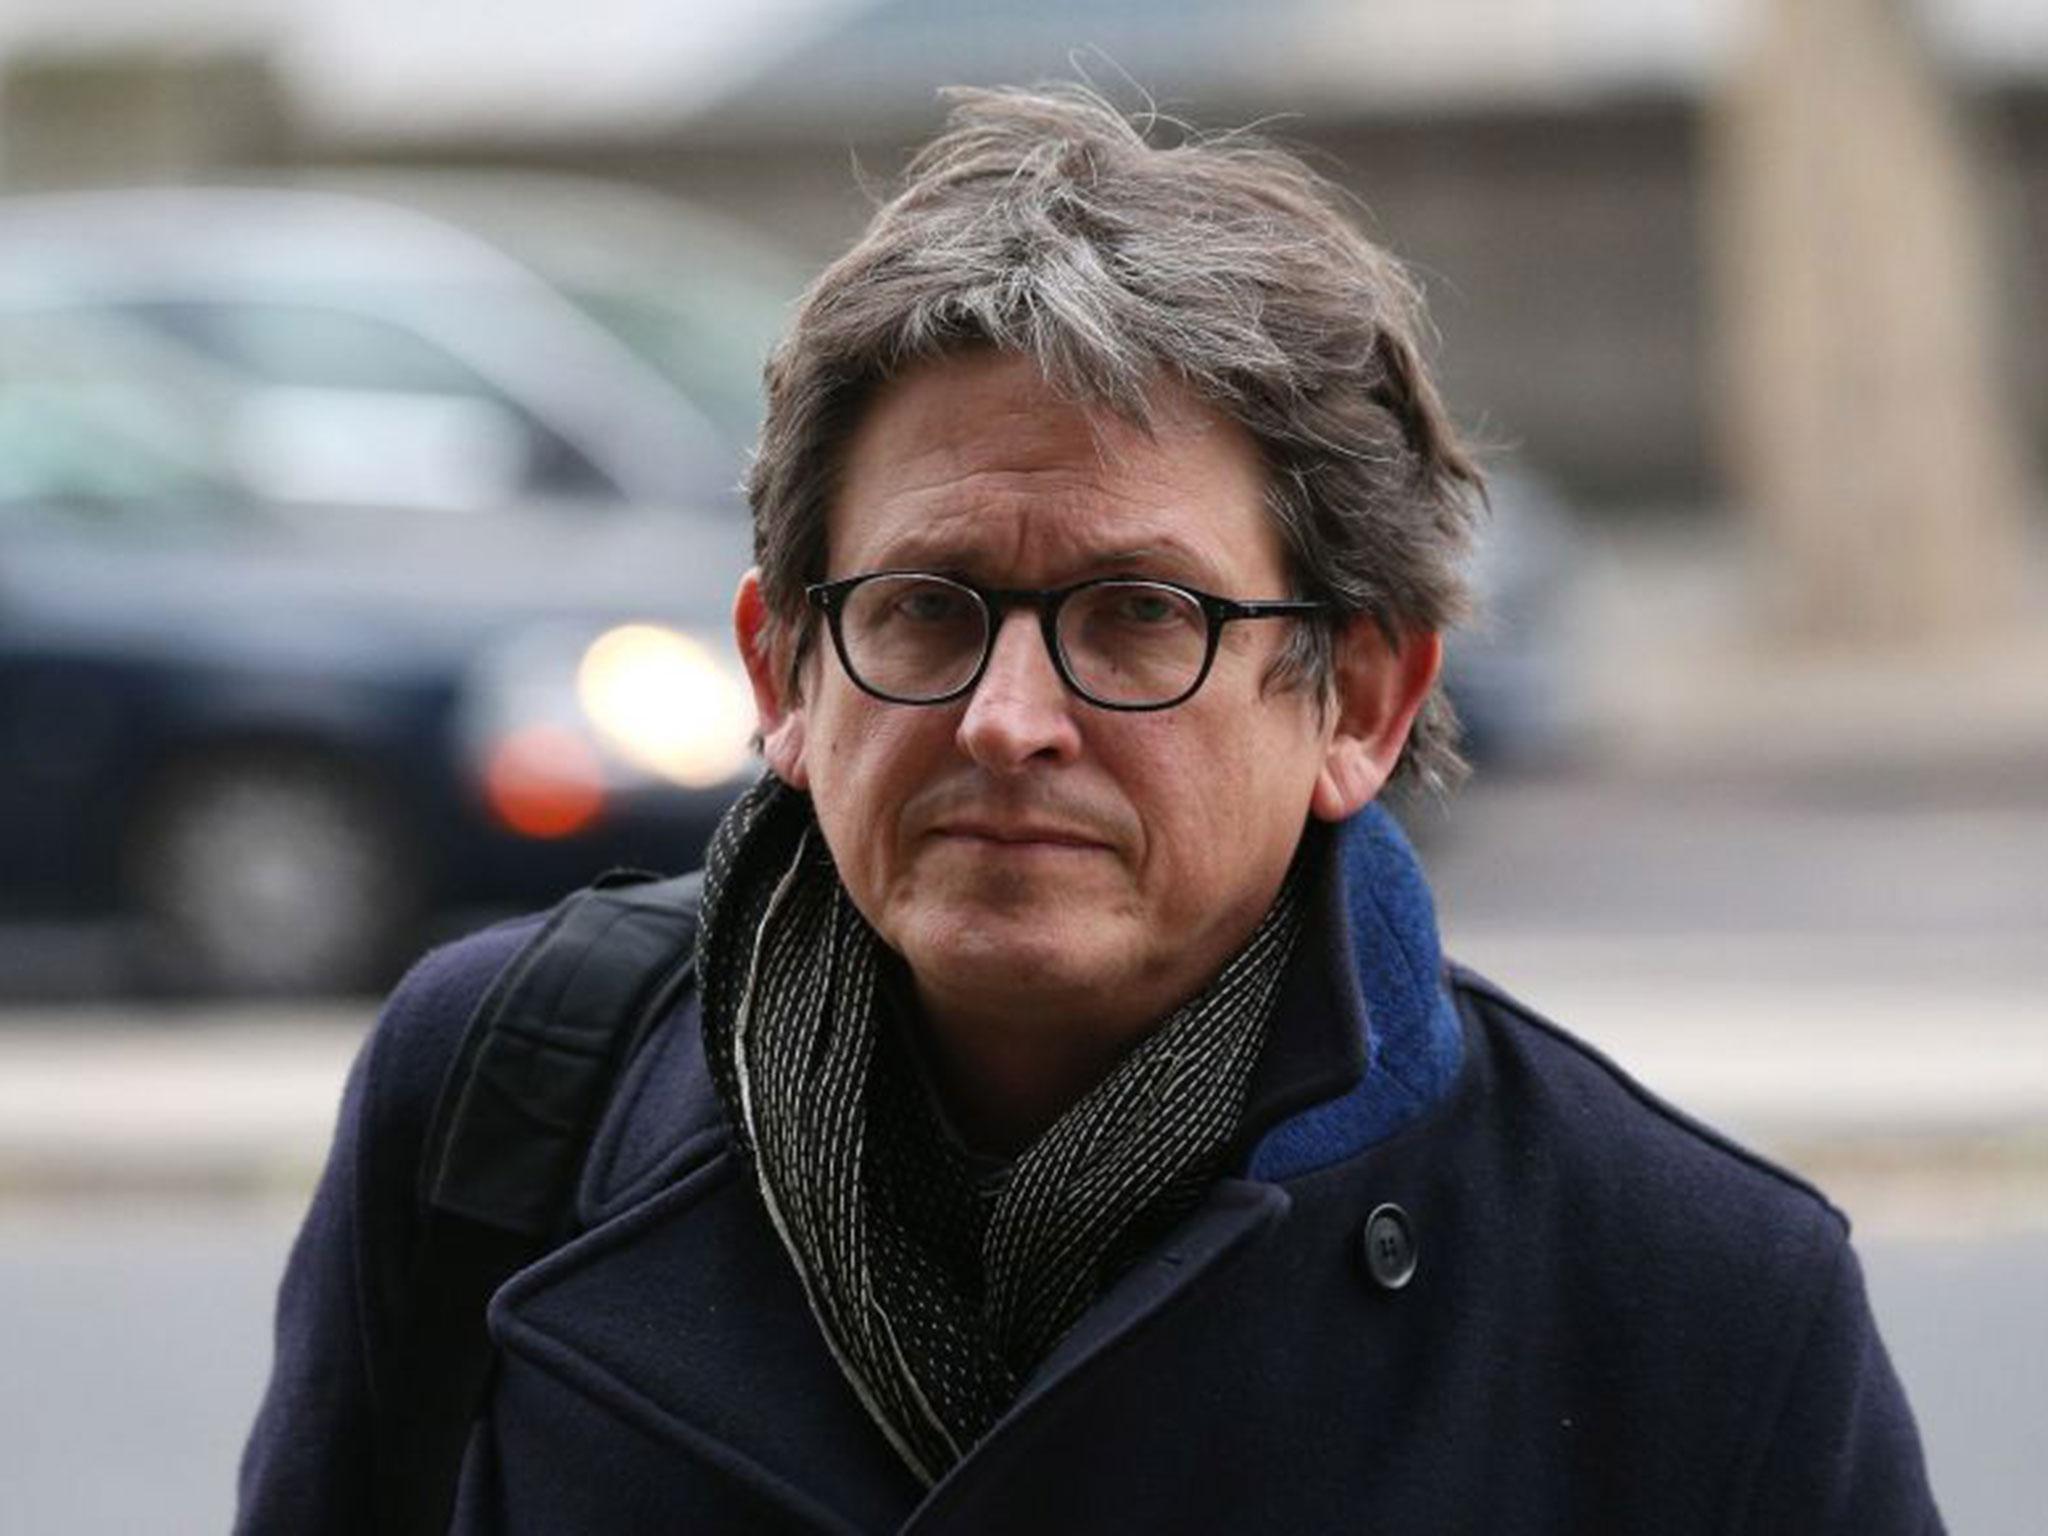 Alan Rusbridger stepped down as editor-in-chief of the Guardian in 2015